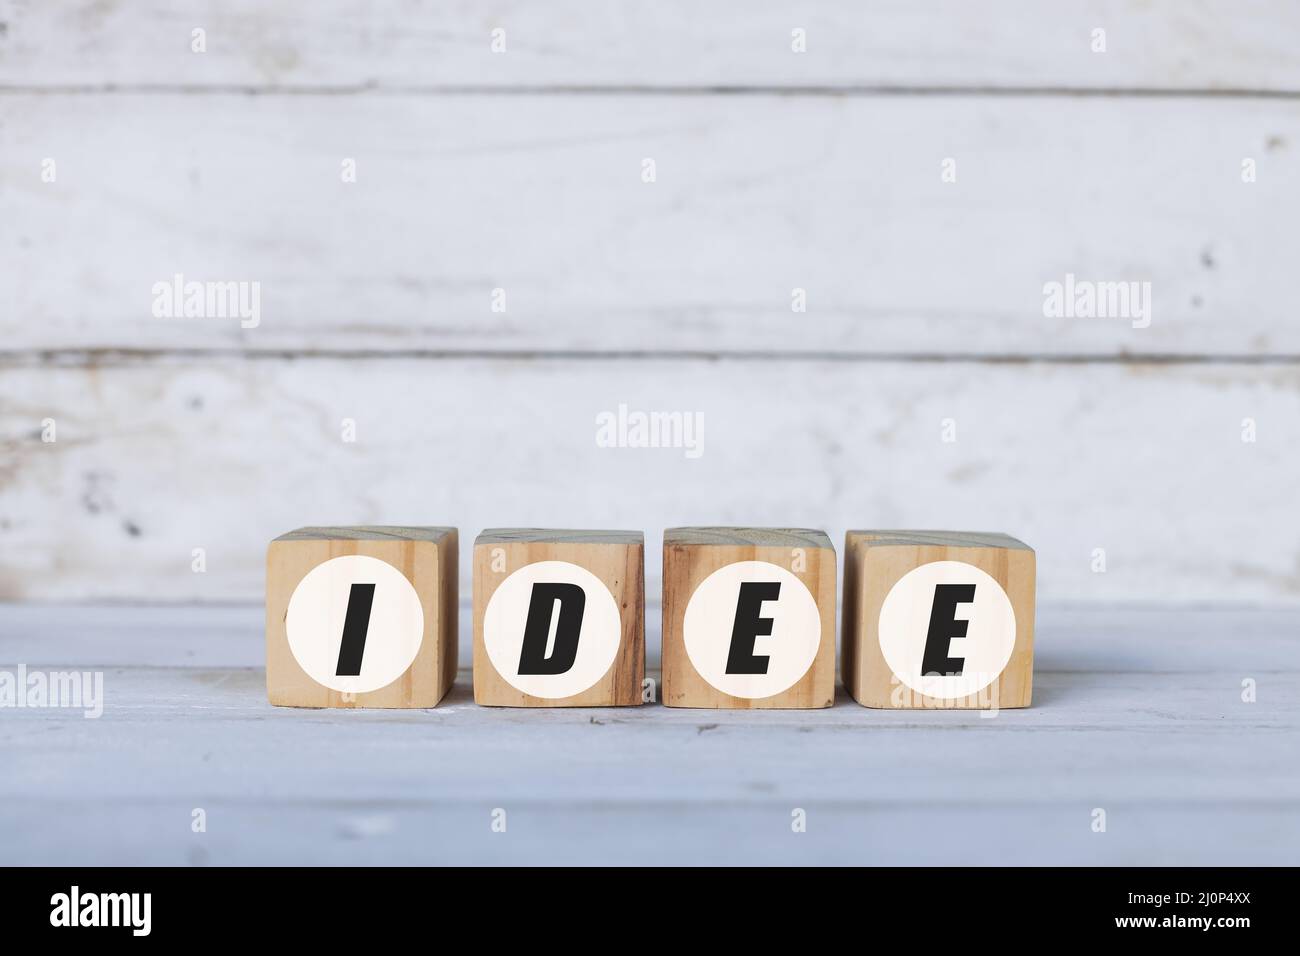 Idee concept written on wooden cubes or blocks, on white wooden background. Stock Photo